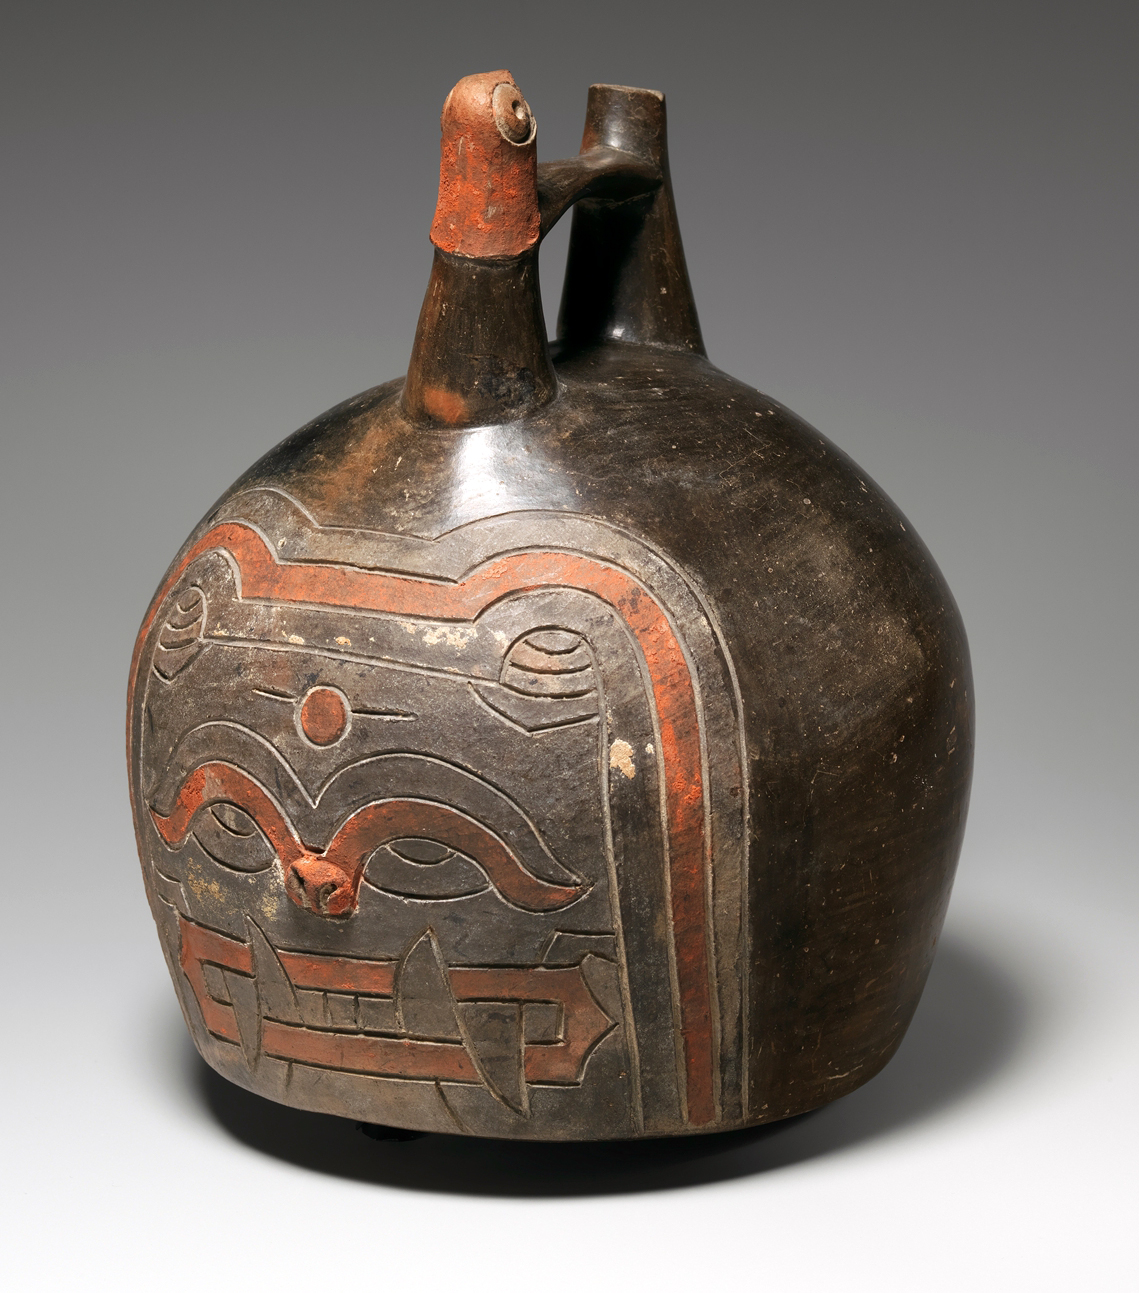 Feline face bottle, Paracas, 4th–3rd century B.C.E., ceramic and post-fired paint, 17.8 x 14.3 x 13.7 cm, from the Ica Valley, Peru (The Metropolitan Museum of Art)